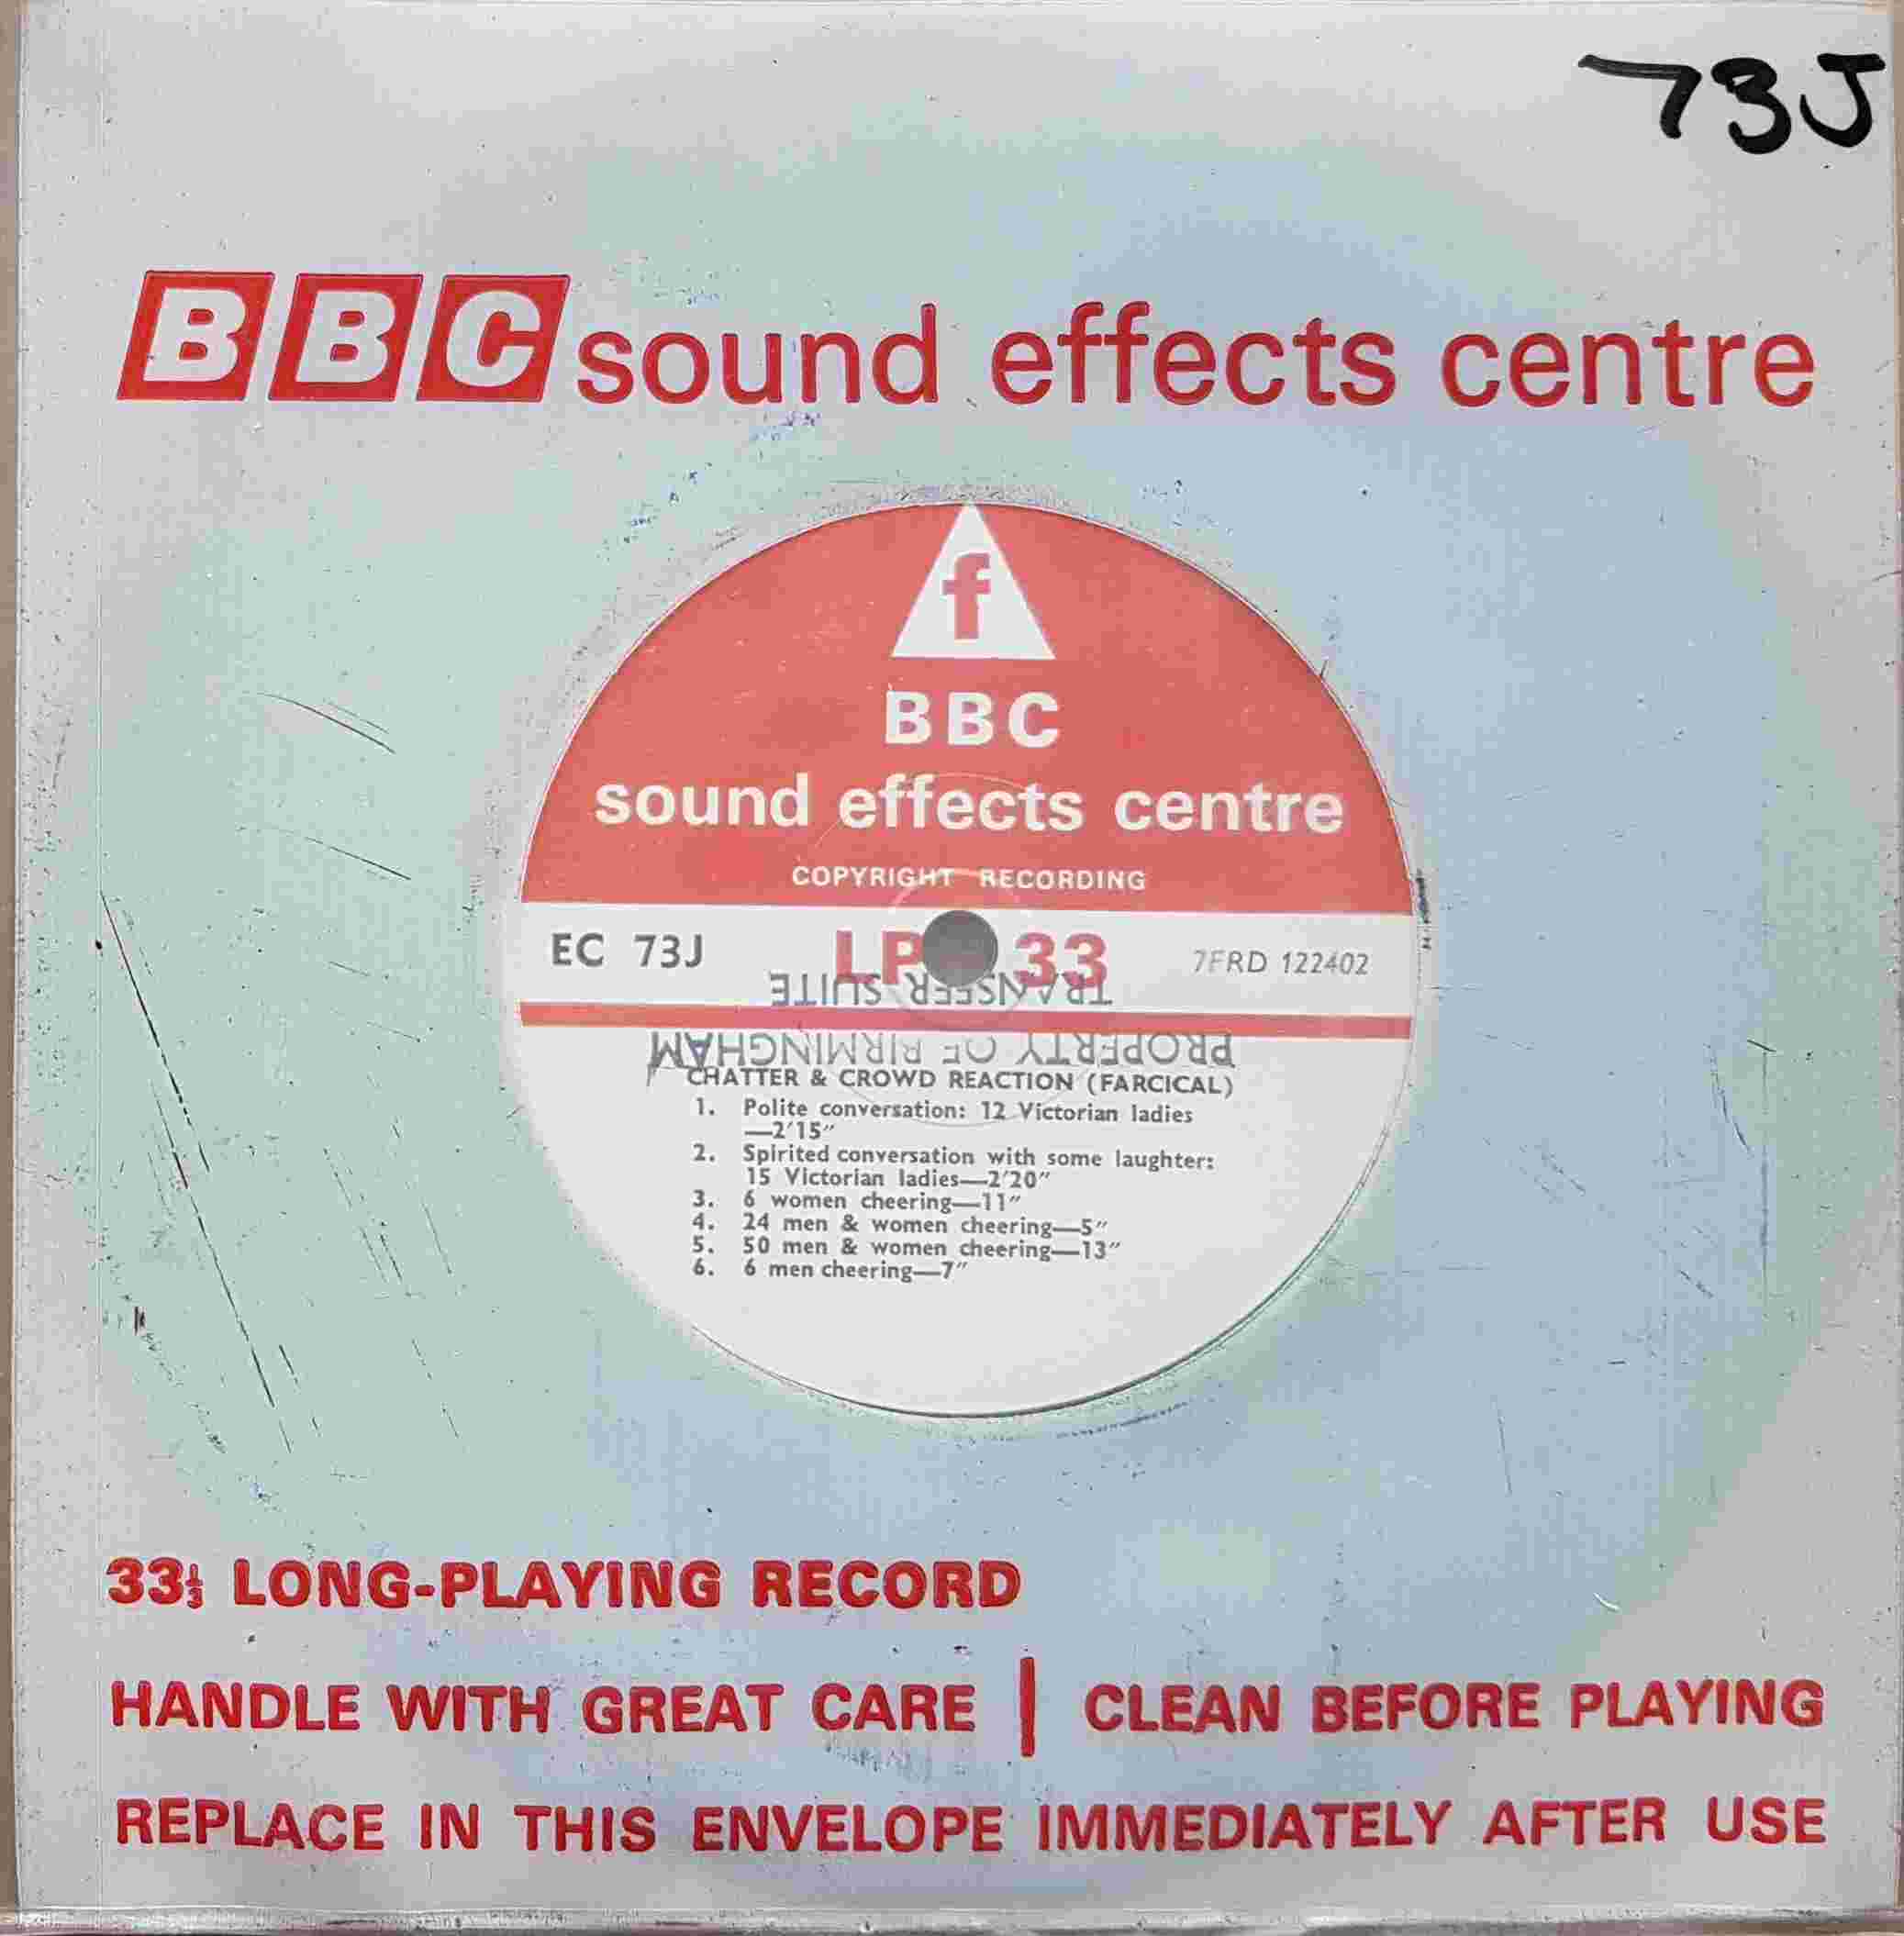 Picture of EC 73J Chatter & crowd reaction (farcical) single by artist Not registered from the BBC records and Tapes library